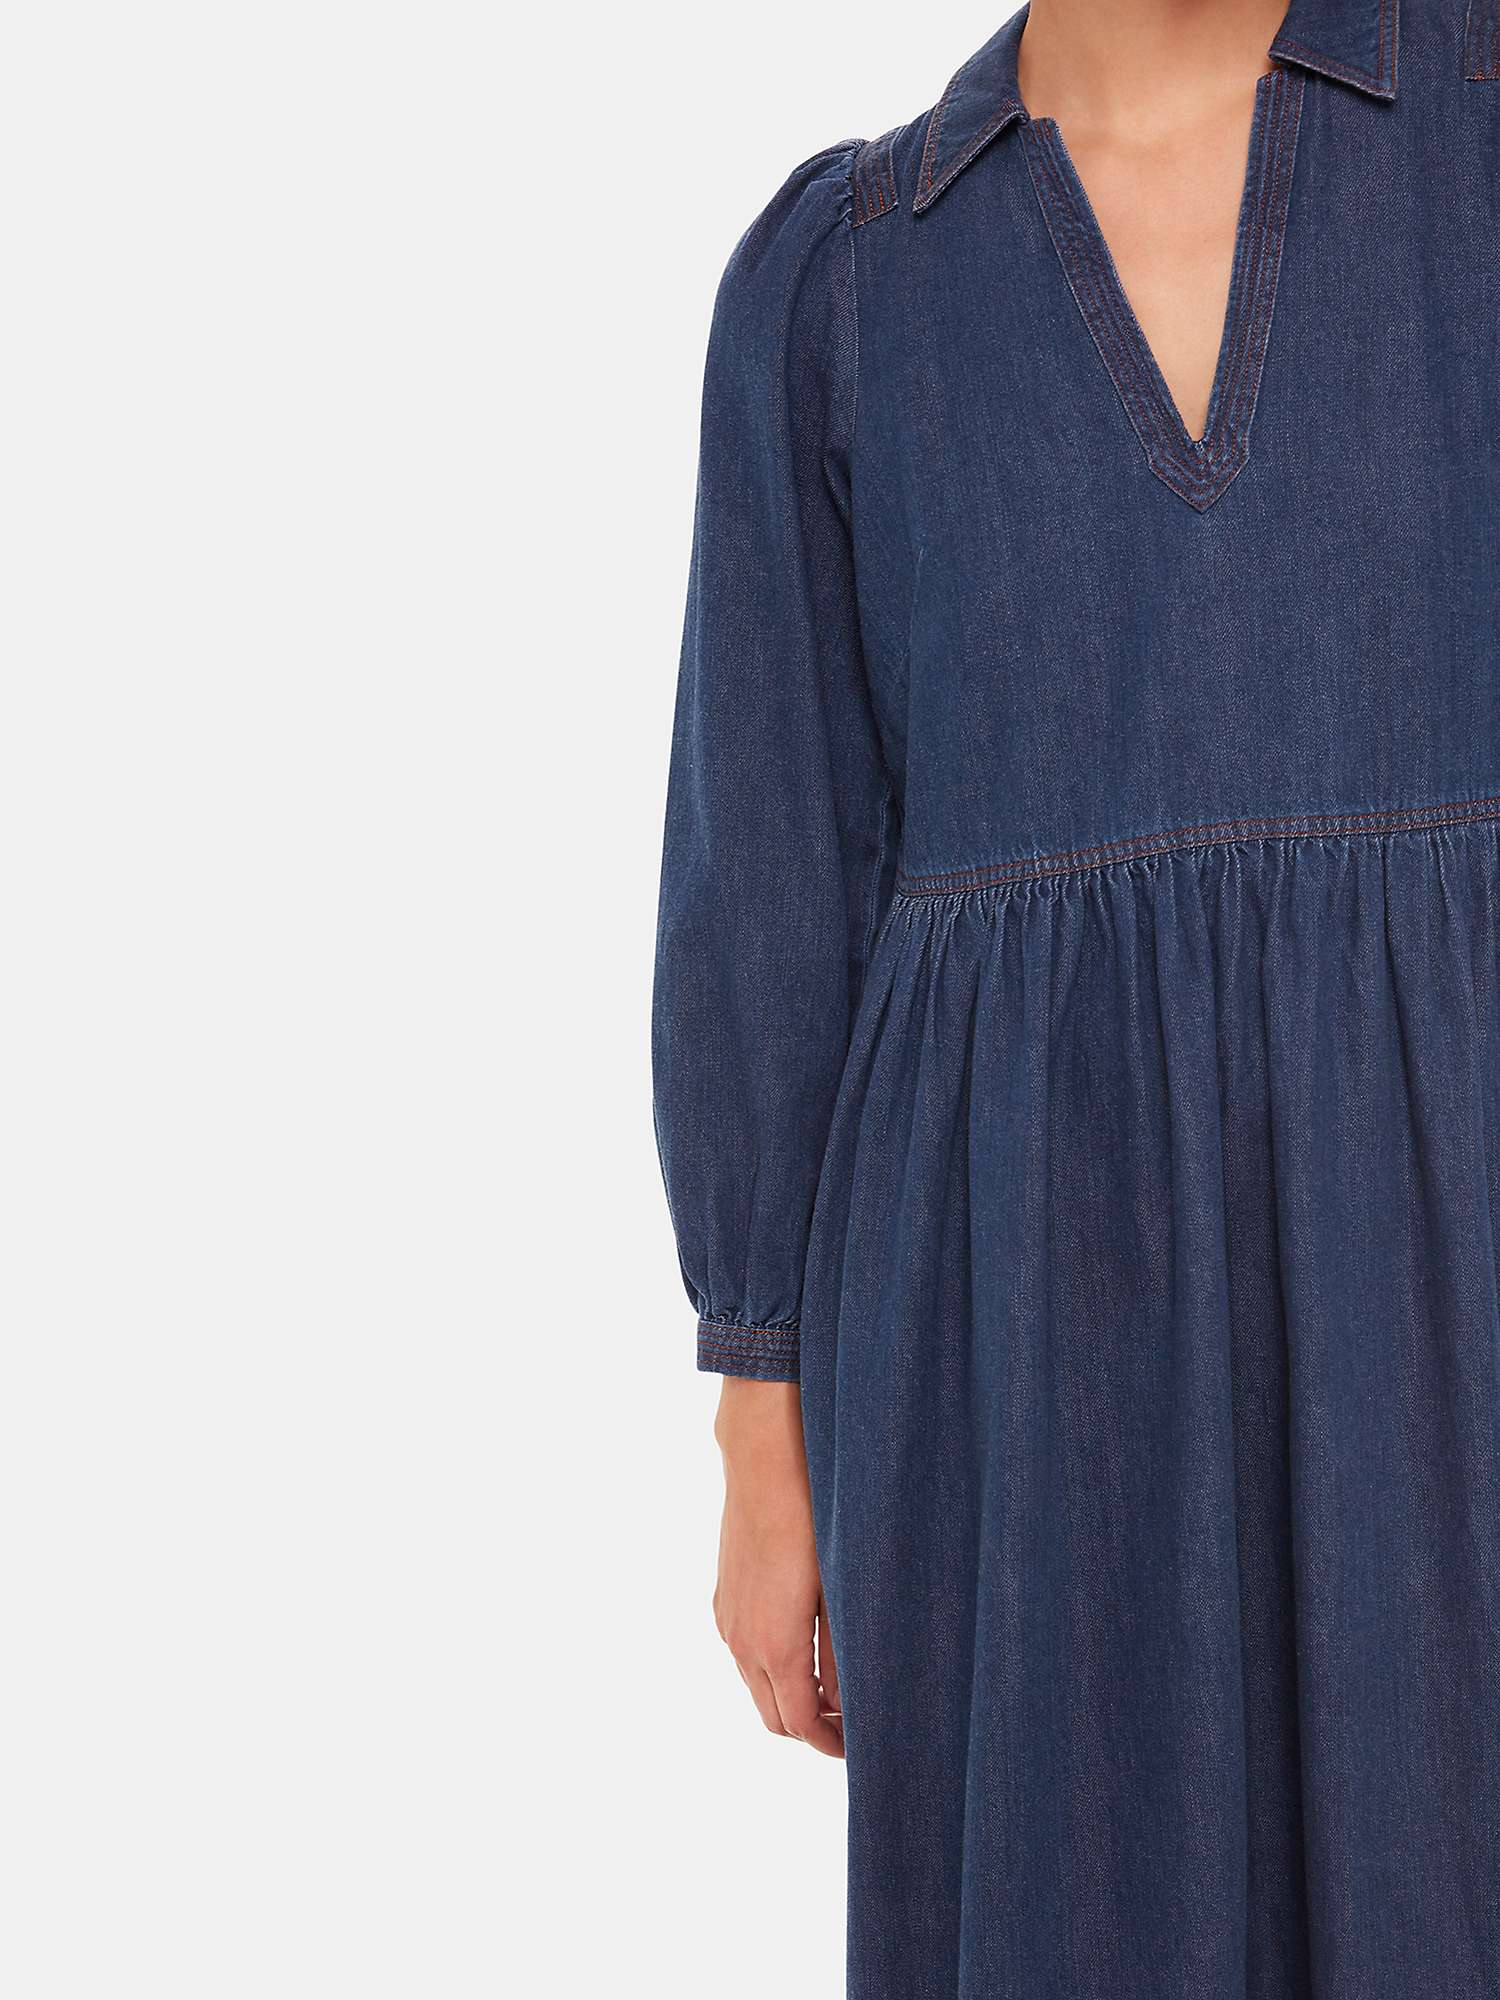 Buy Whistles Rina Trapeze Dress, Blue Online at johnlewis.com